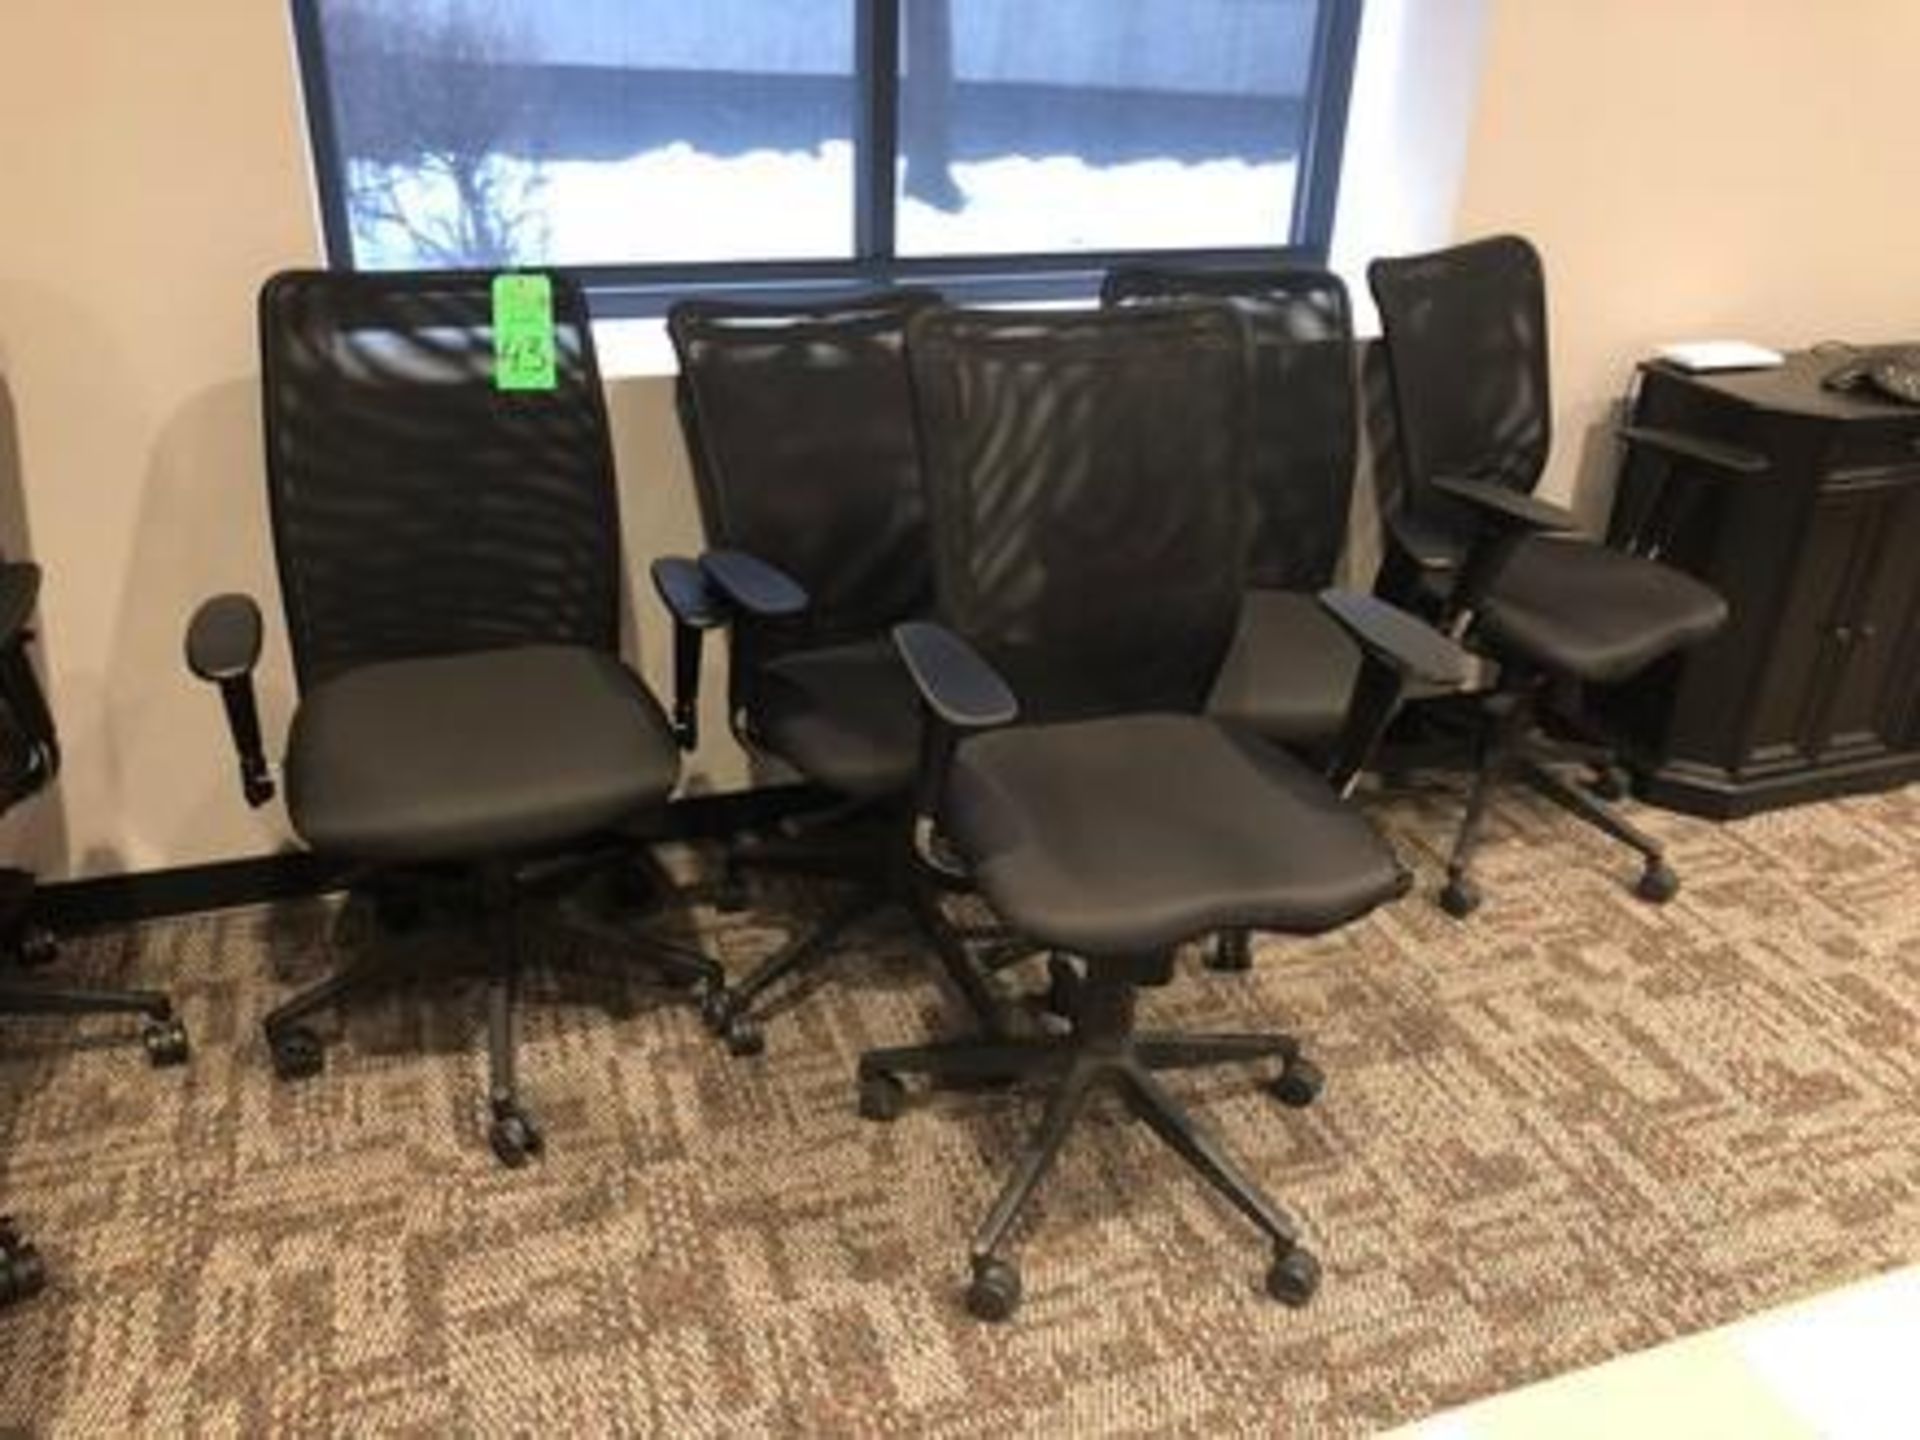 (5) Compel Model Argos Mesh Swivel Arm Chairs on Casters